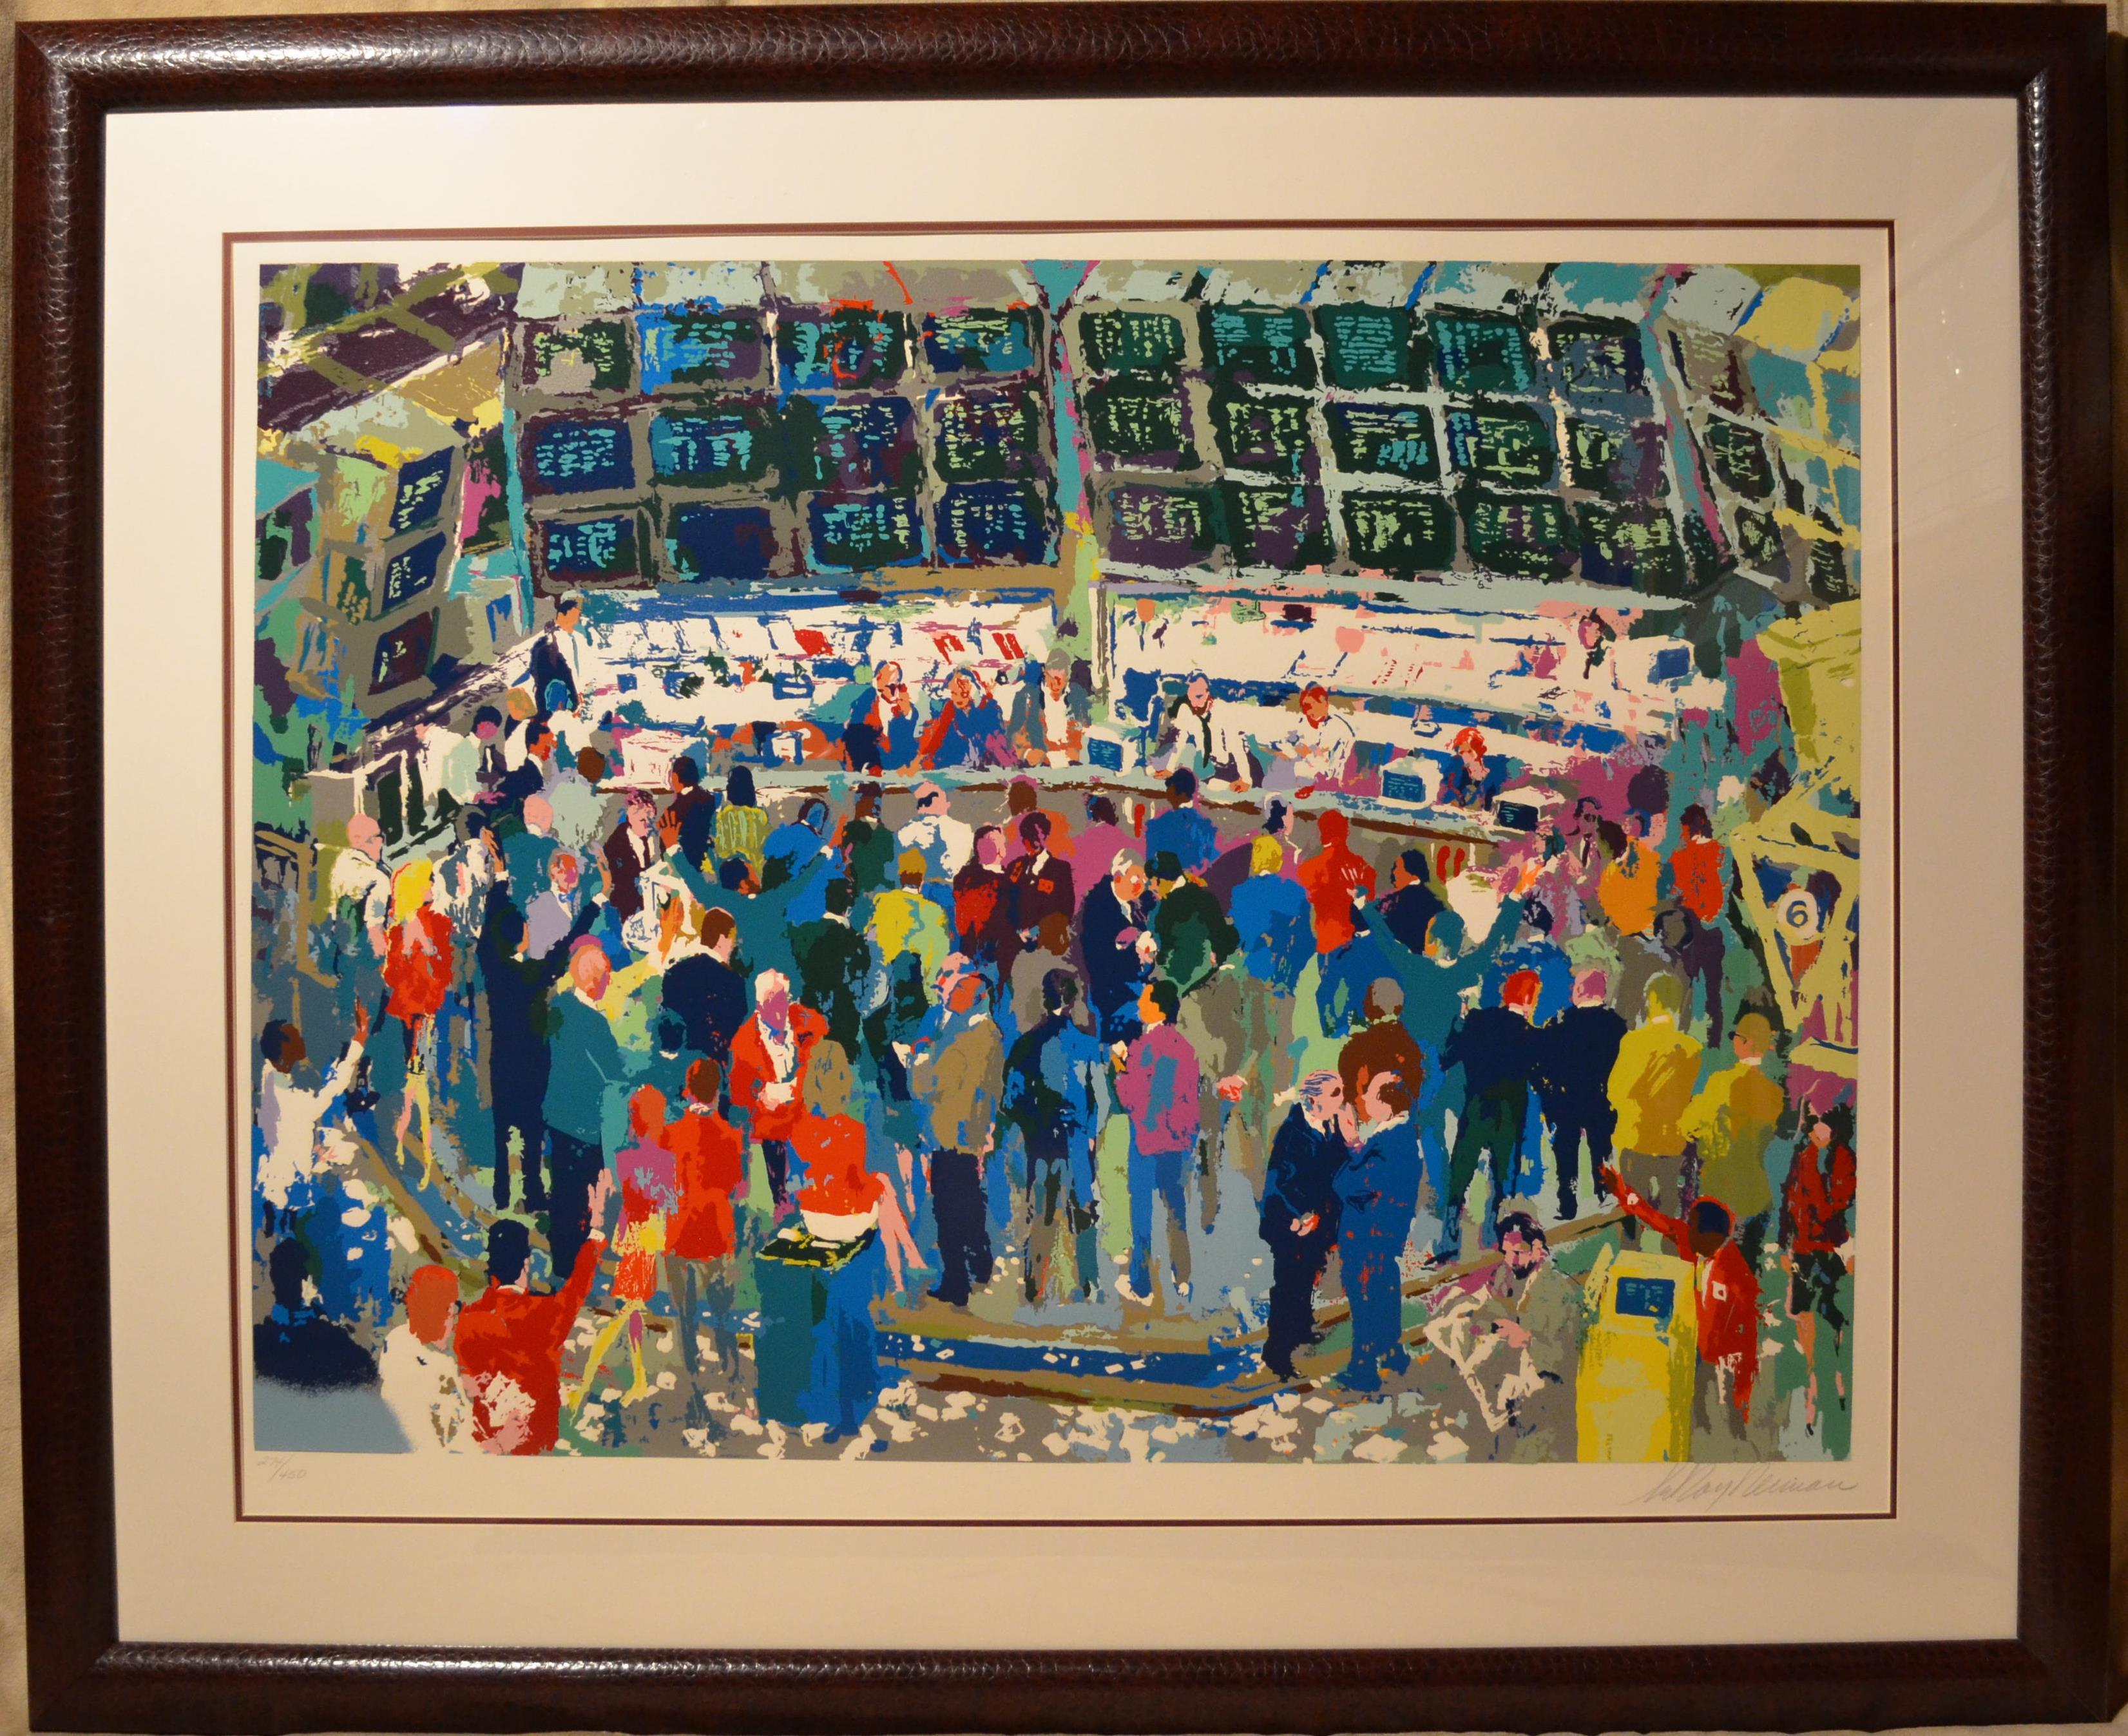 Chicago Options - Serigraph by LeRoy Neiman - Print by Leroy Neiman